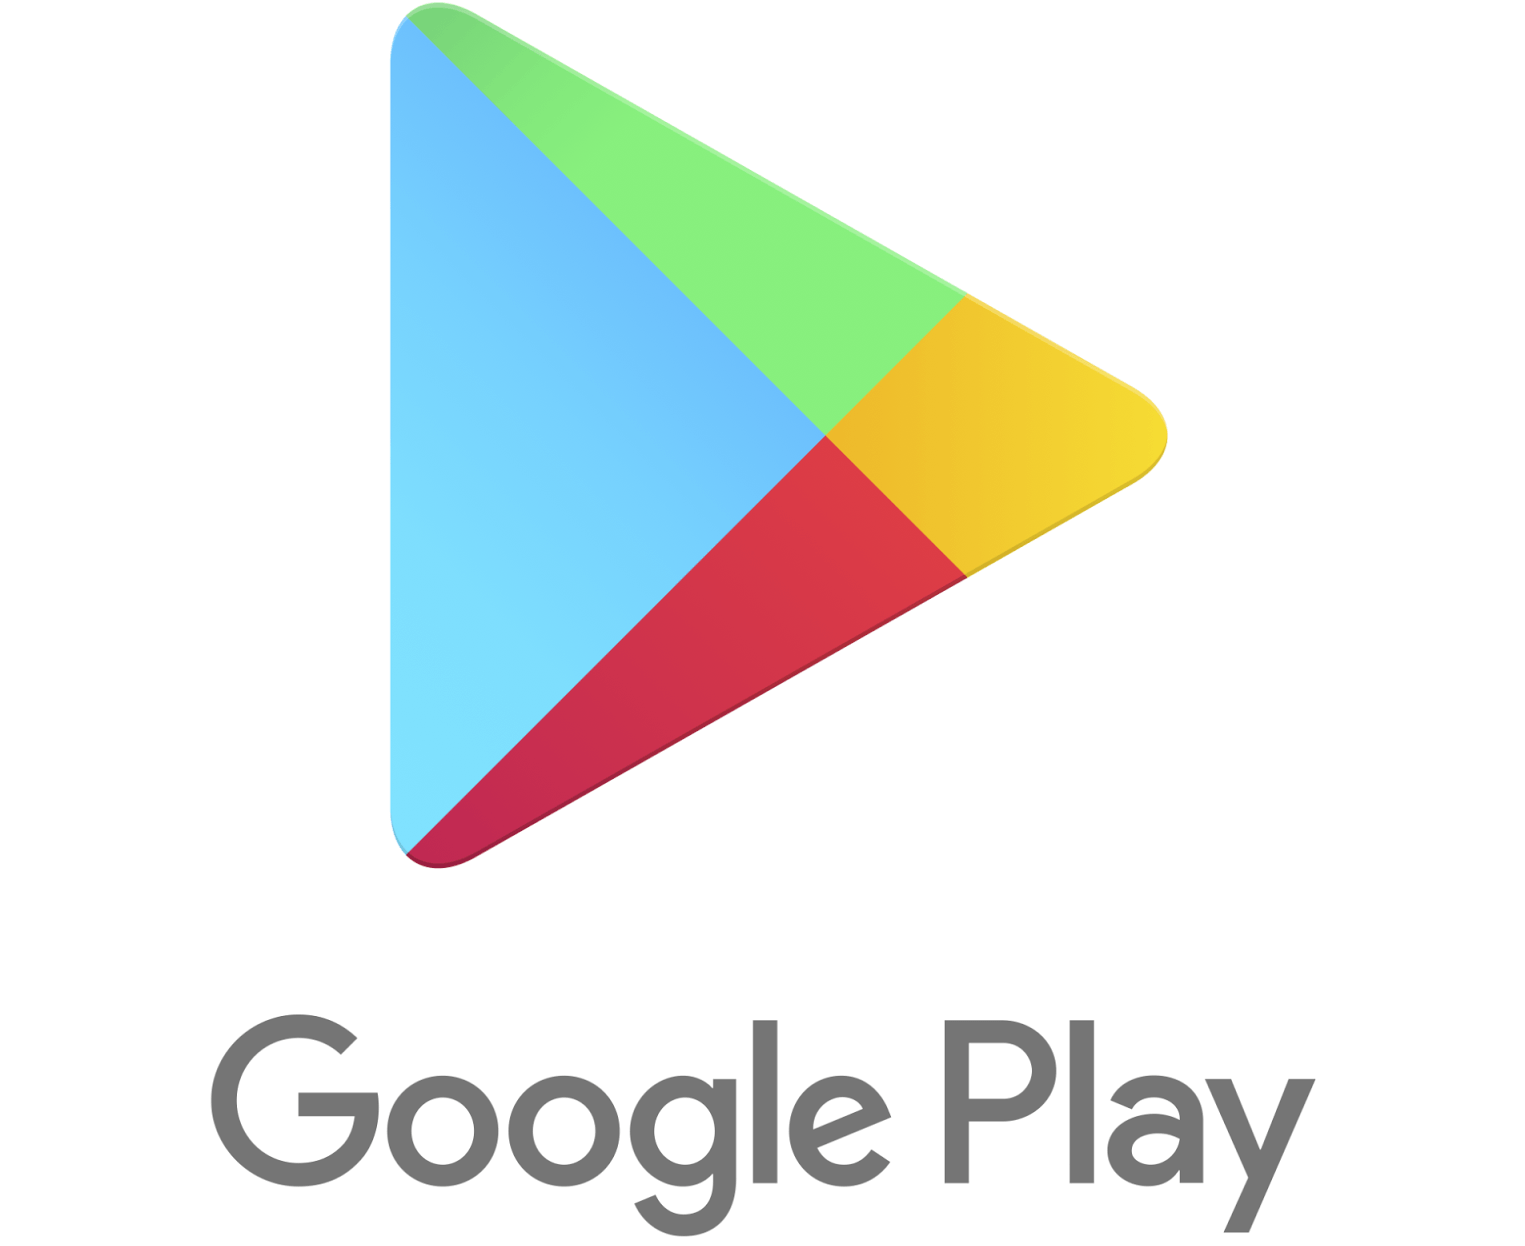 Google App Store Logo - How to update the Google Play app on your Android phone or tablet